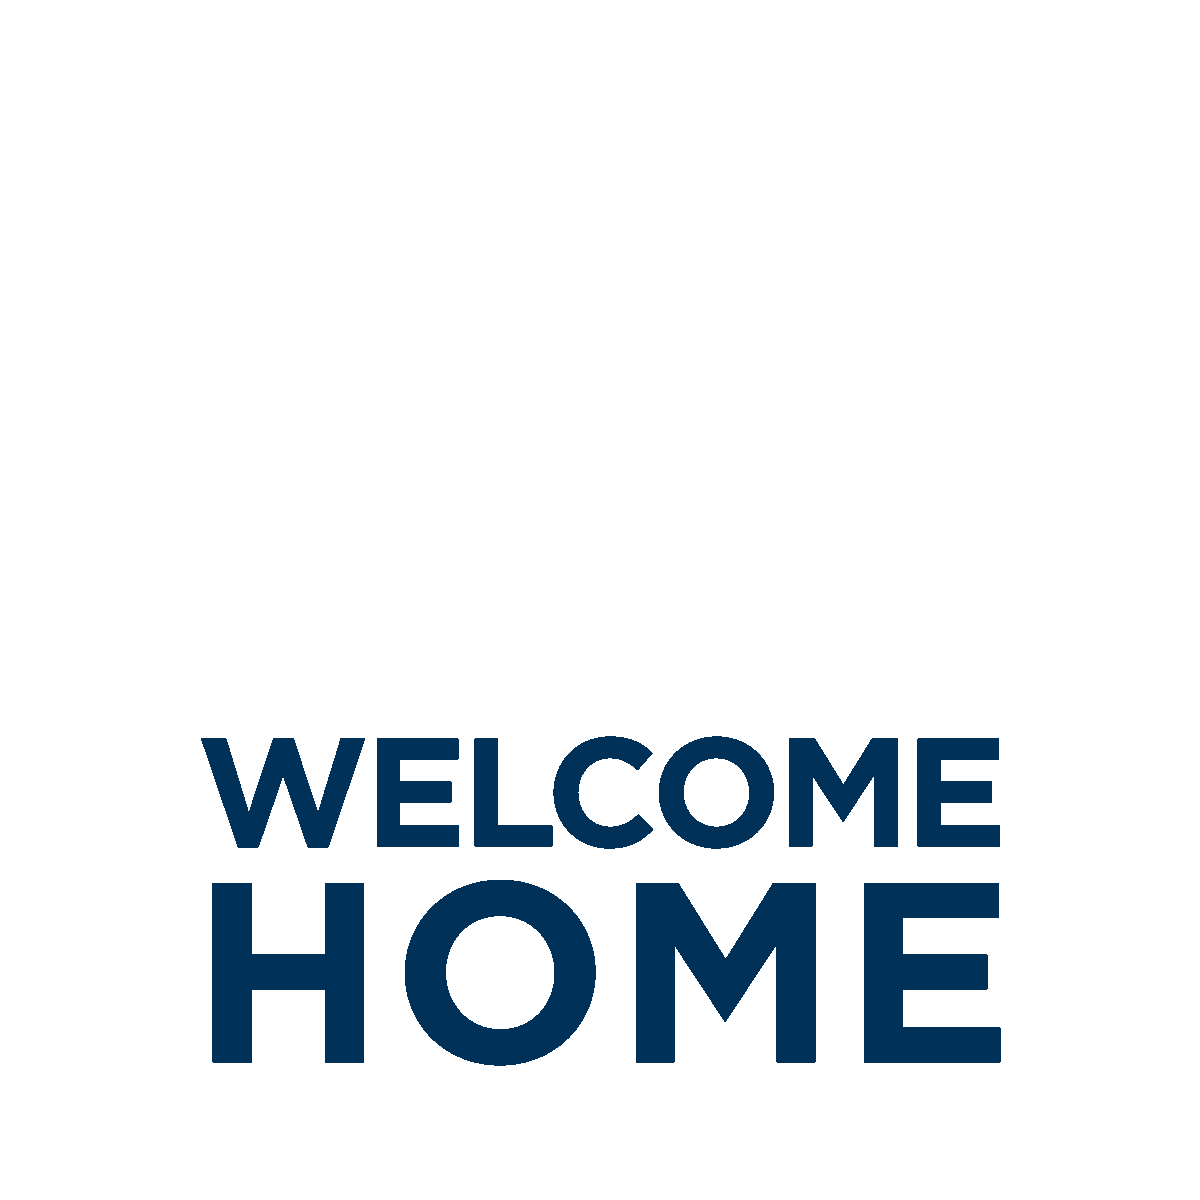 Celebrate Welcome Home Sticker by Finance of America Mortgage